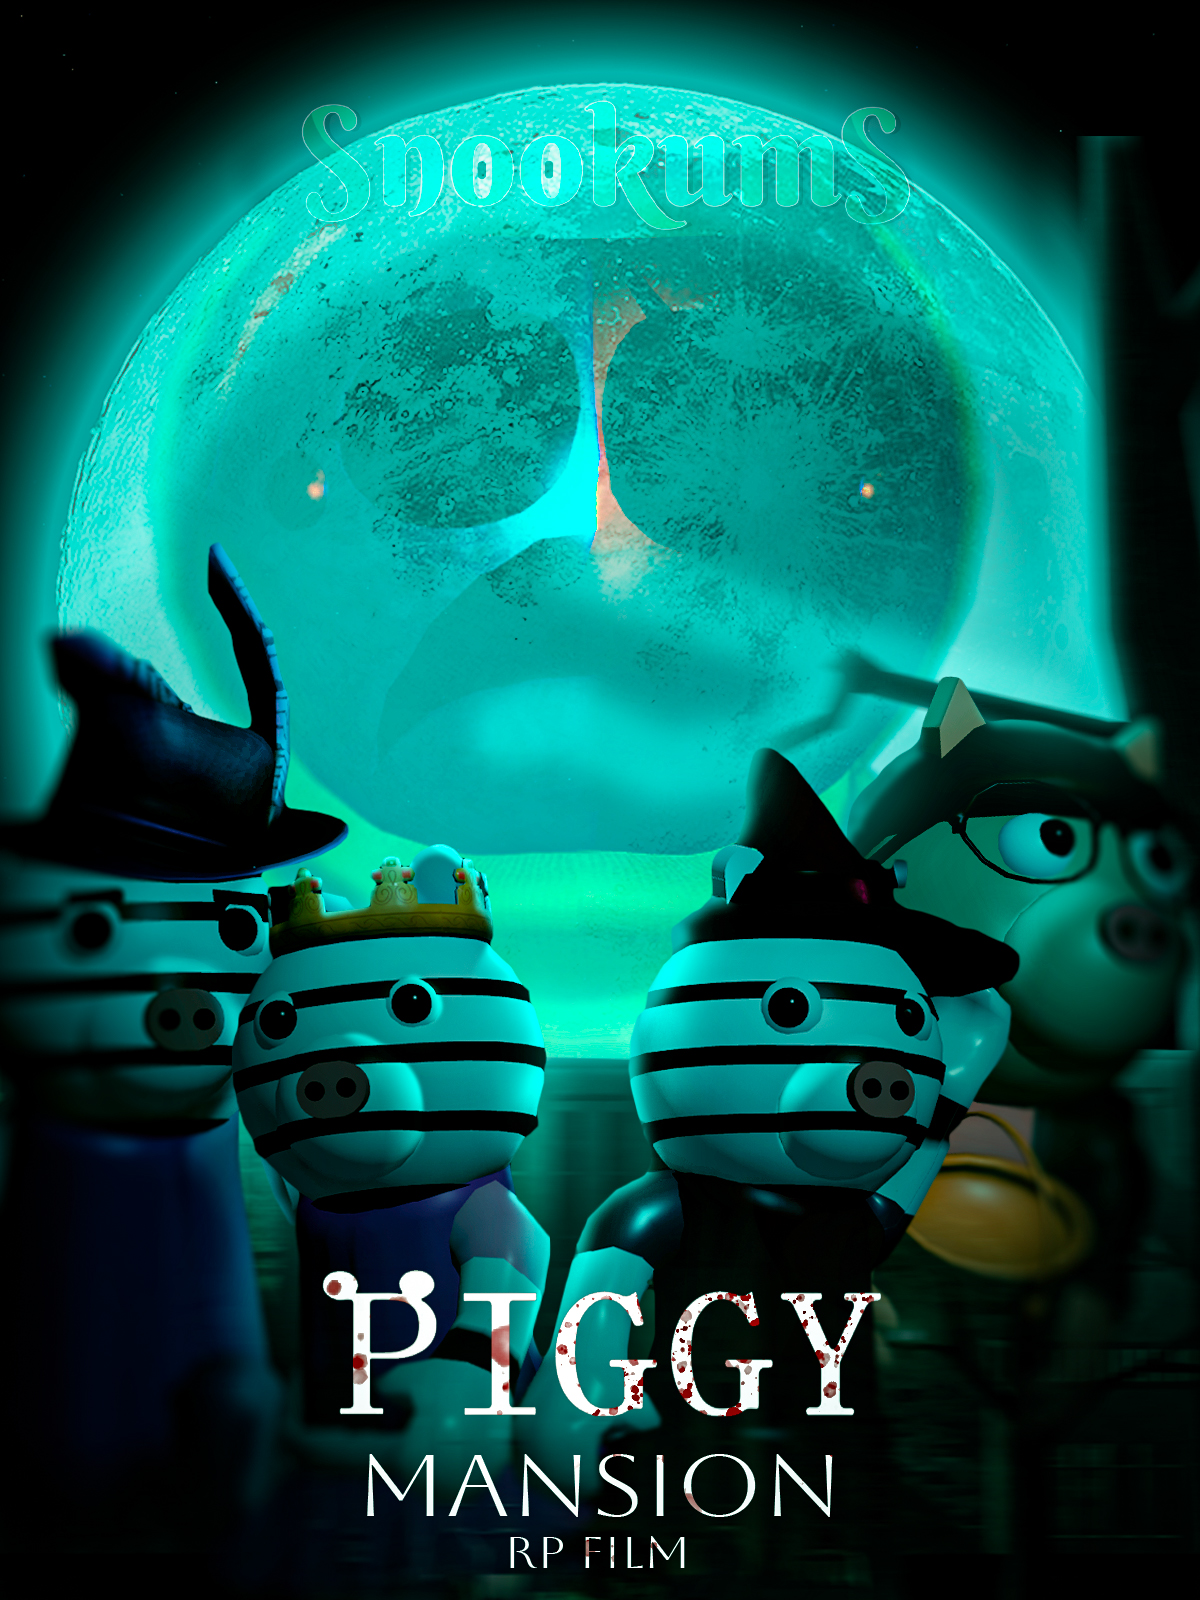 PIGGY THE MOVIE Coming Soon (Roblox) 